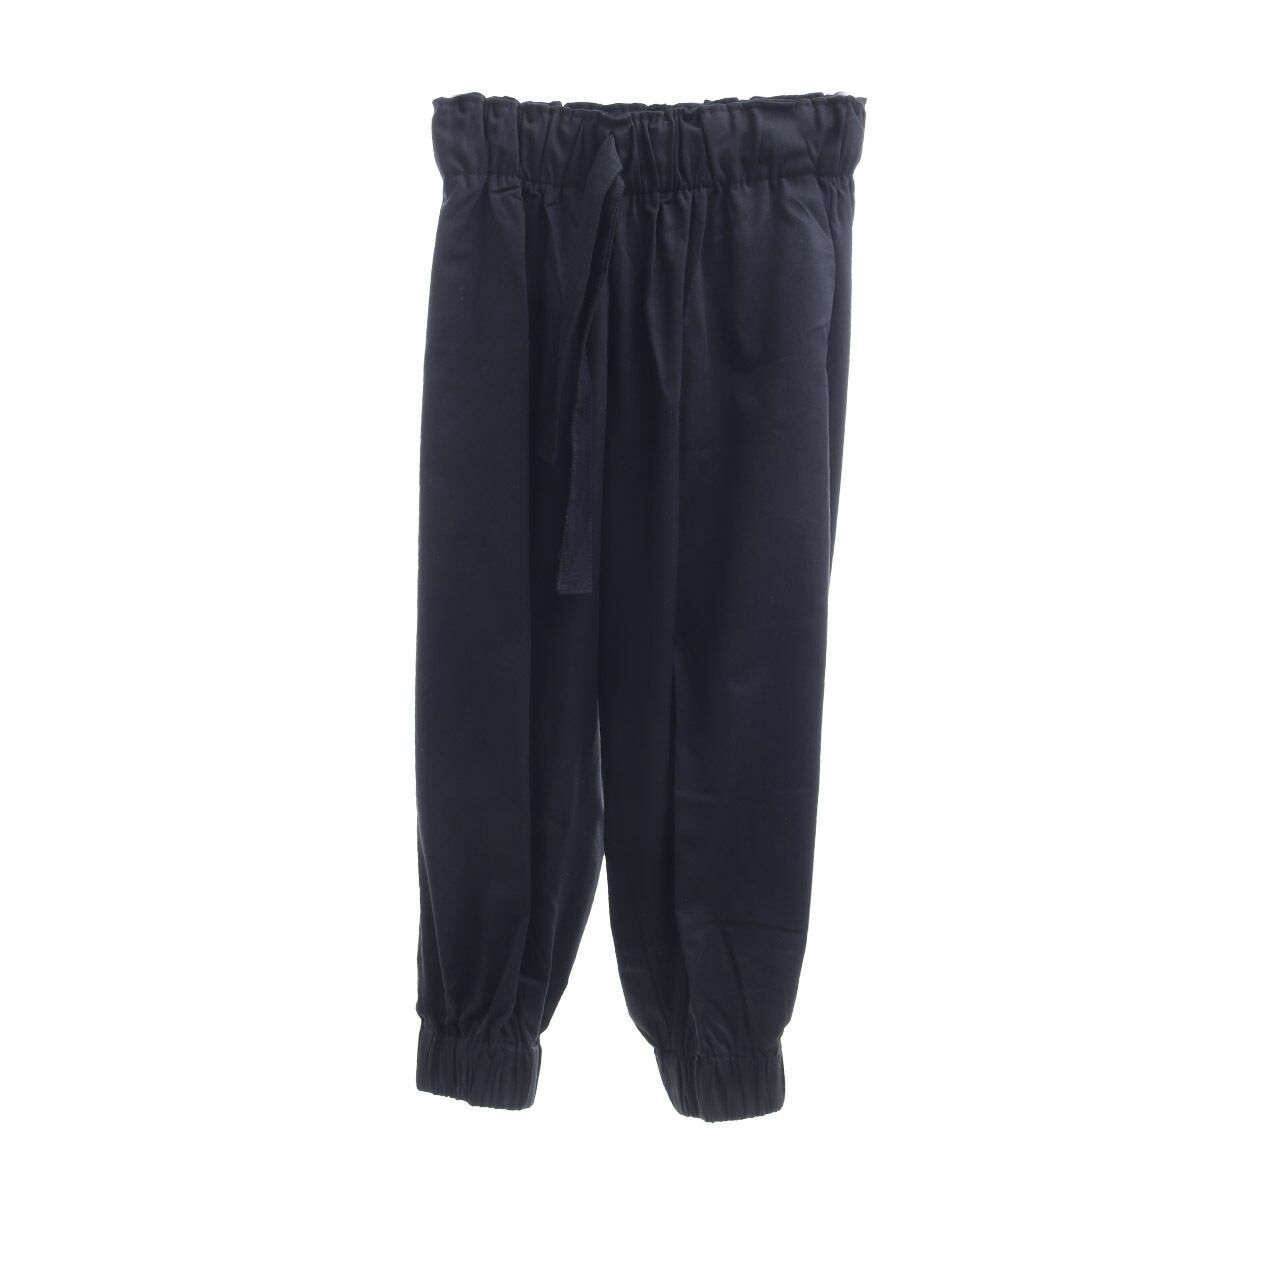 Noho The Label Black Cropped Pants